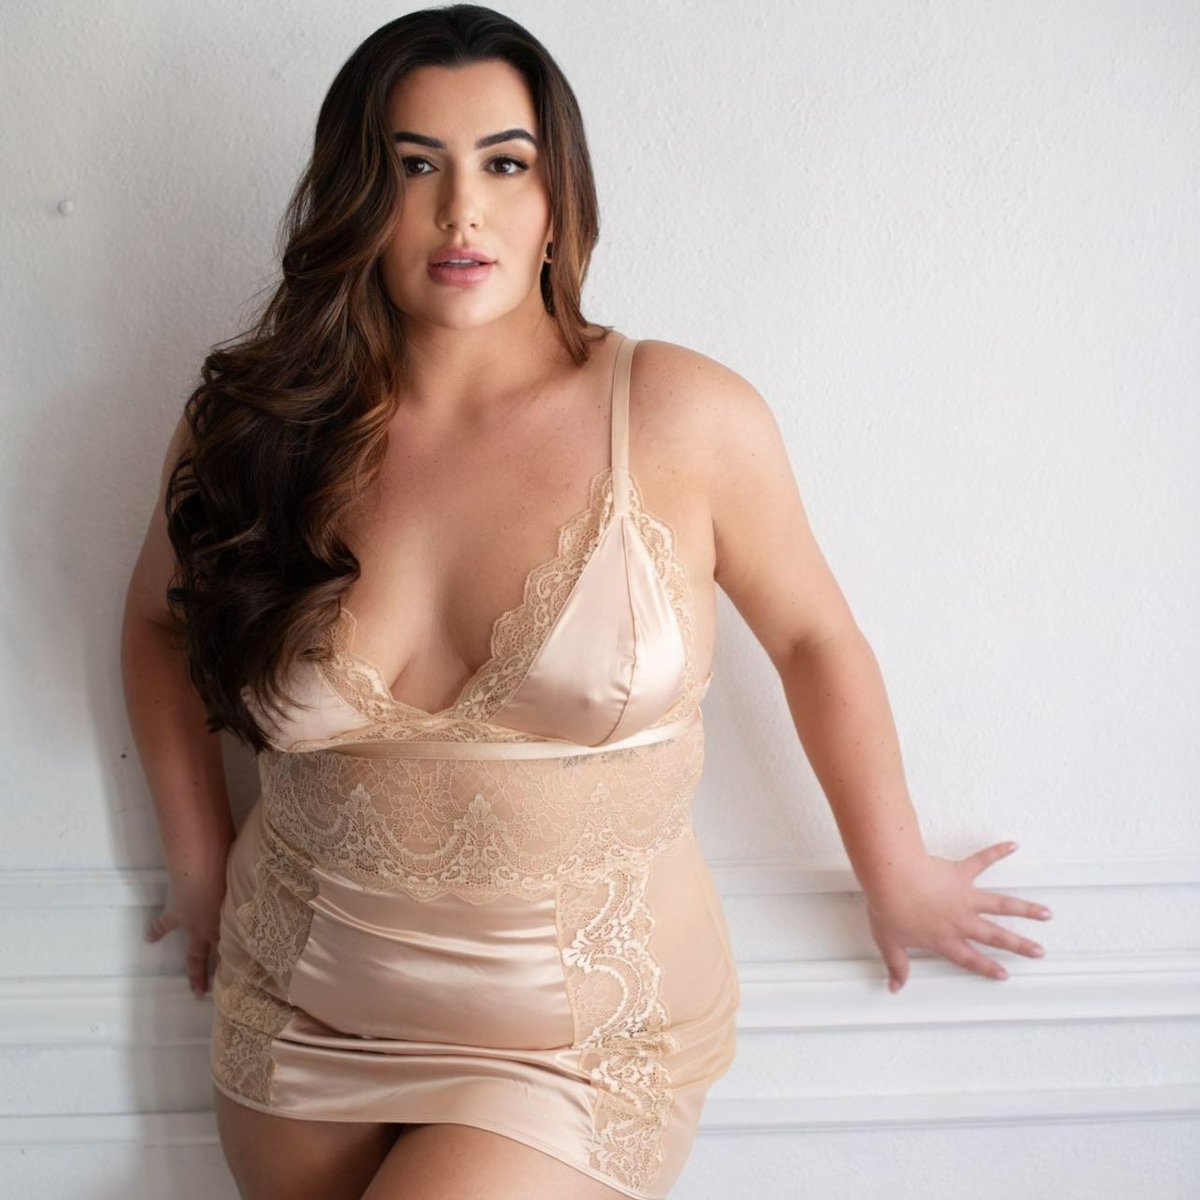 Feeling like a satin dream in the Curvy Laura Satin Babydoll Dress ✨ With superior stretch and lace details, this is your go-to silhouette for the holiday season. 💕 #LuxuryVibes #Satindress #CurvyConfidence #alwaysohlala